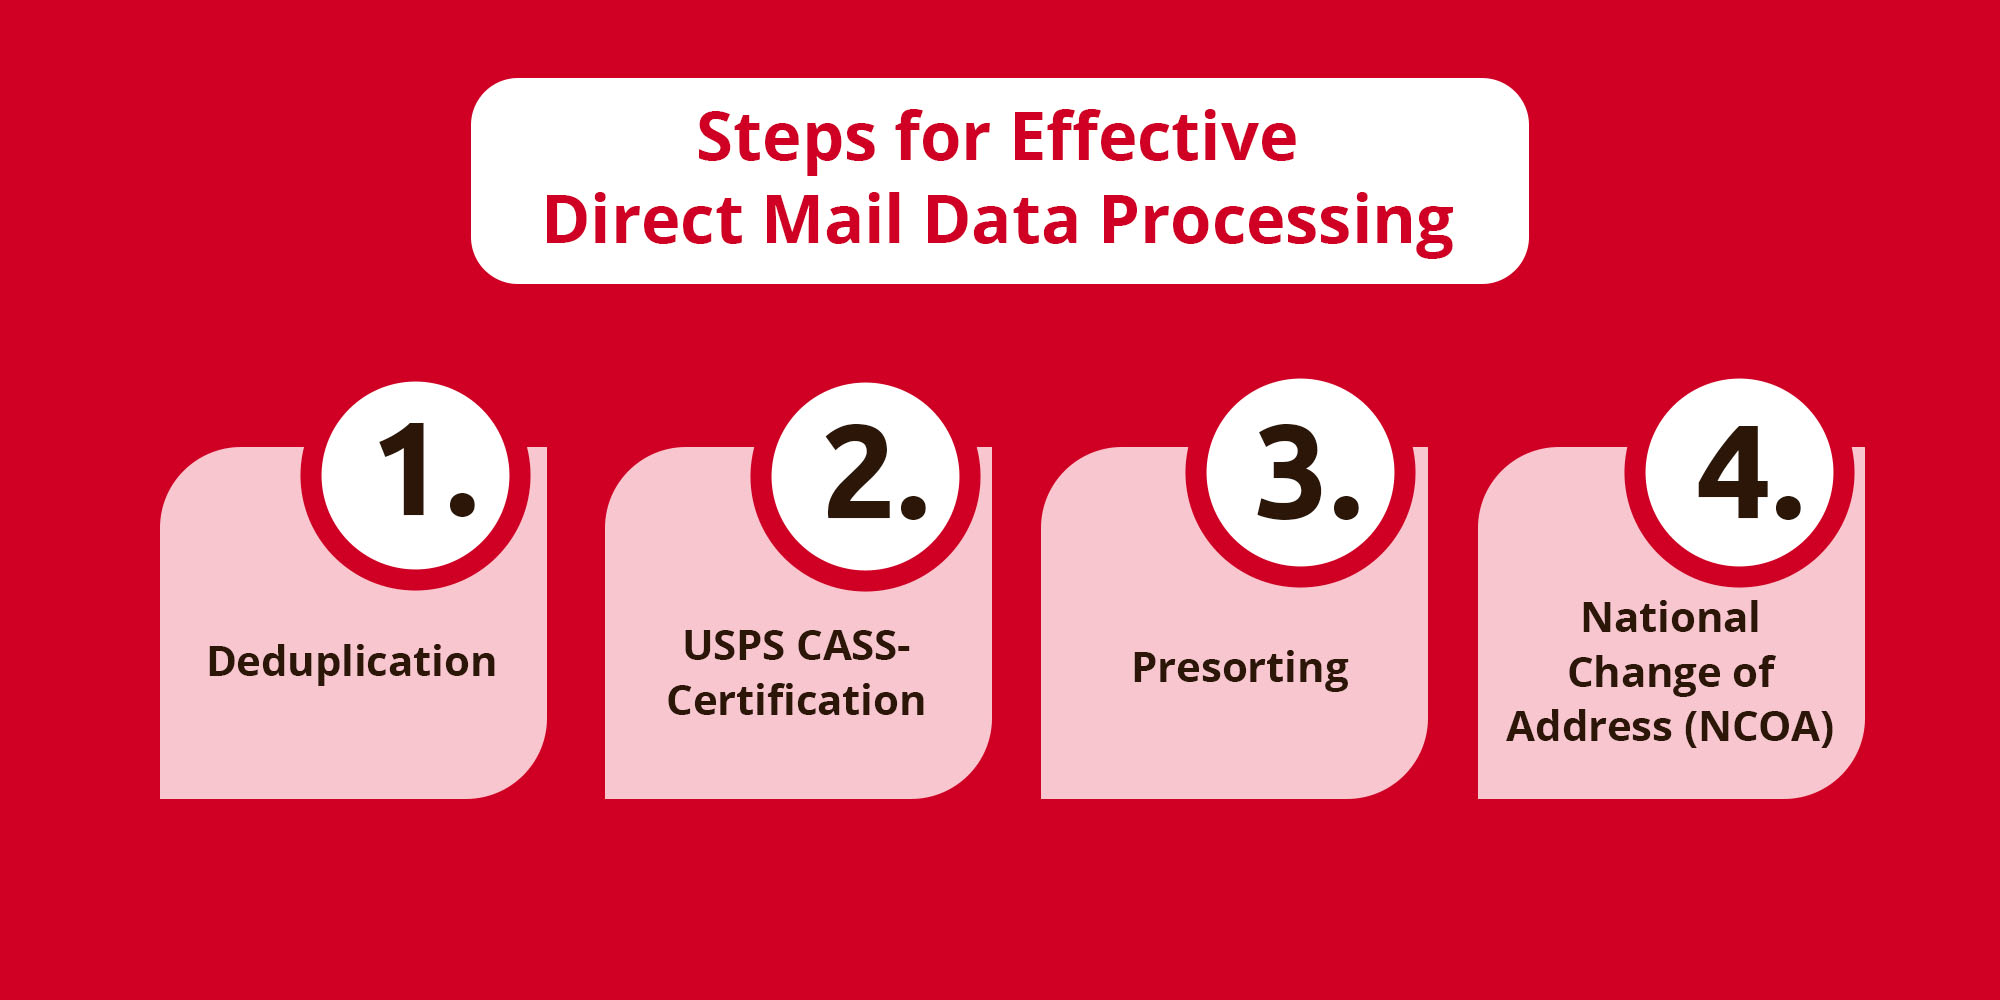 Optimizing Data Processing: Compu-Mail's Cost-Effective and Efficient Solutions